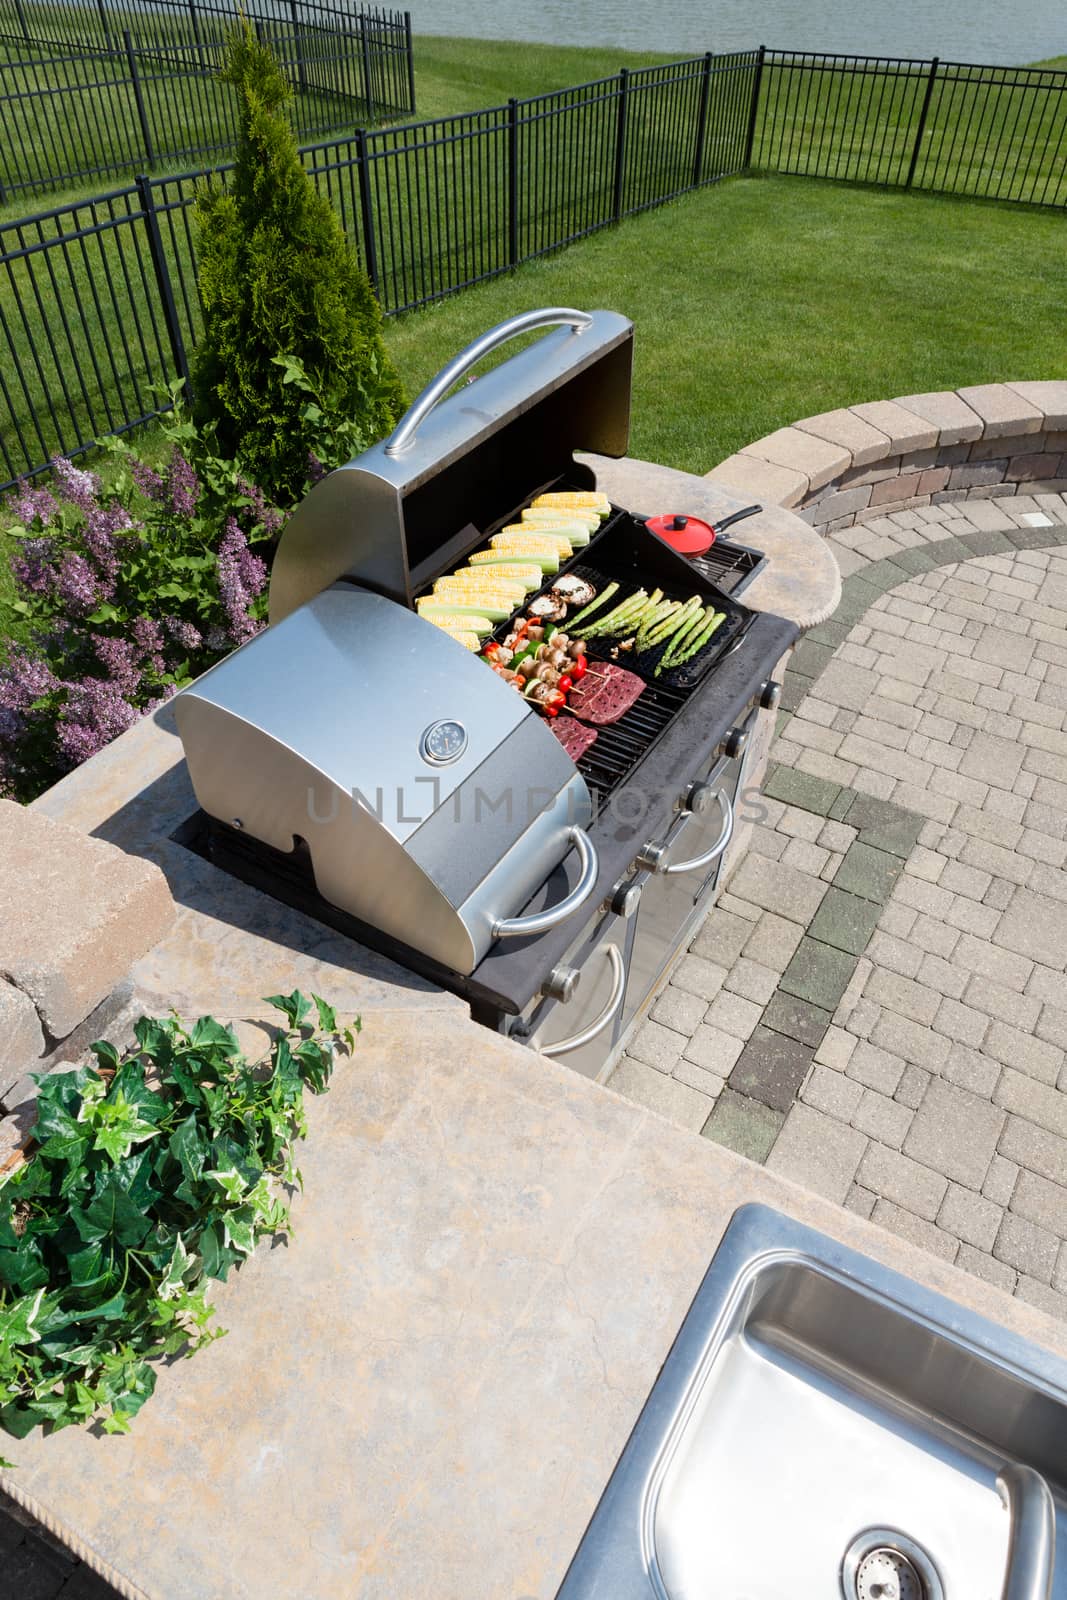 Healthy outdoor living cooking in a summer kitchen fitted with a sink and counter and large gas barbecue loaded with fresh vegetables and meat on an open-air brick patio in the back garden